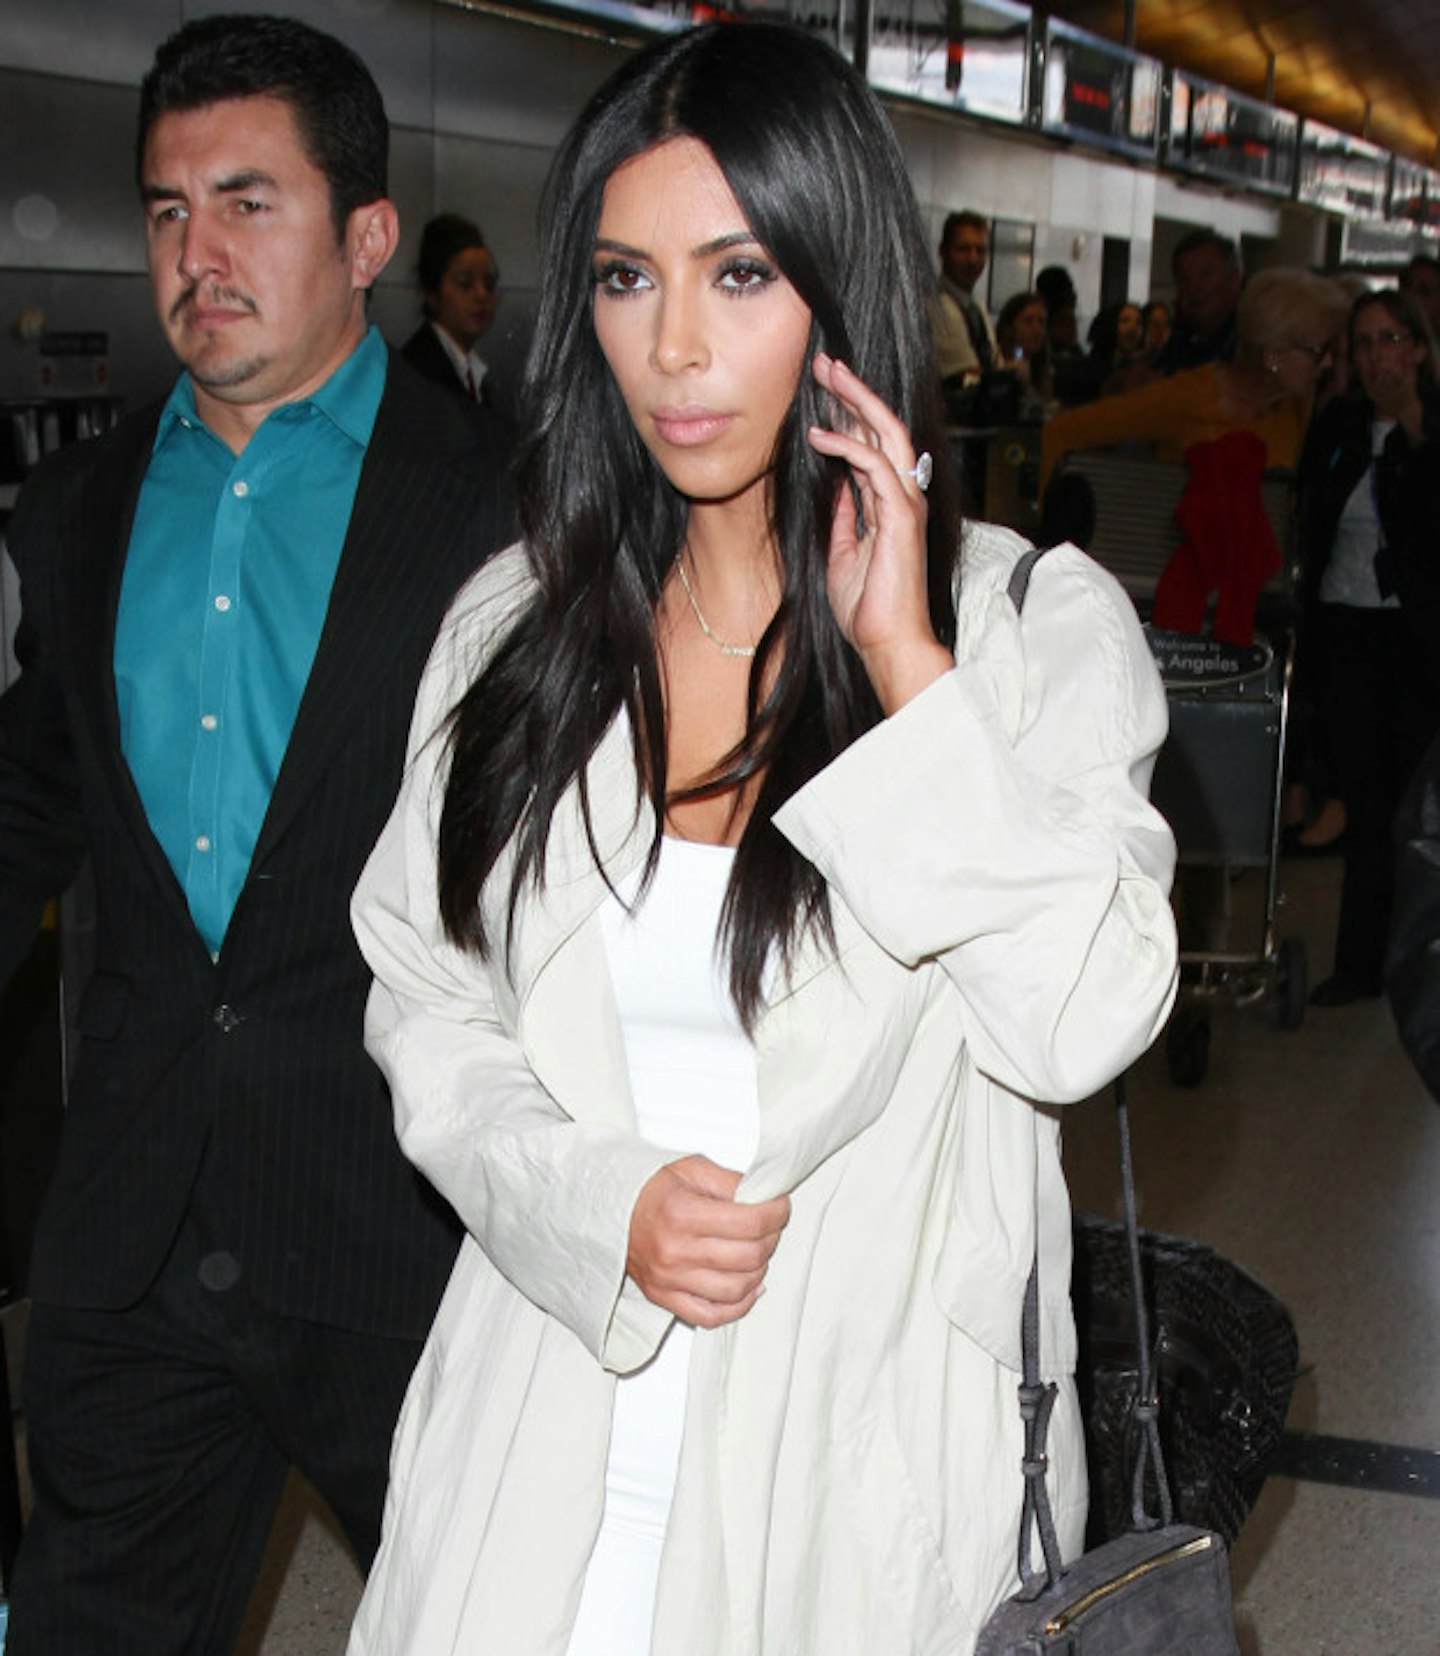 Parking spaces are now out of bounds for Kim K